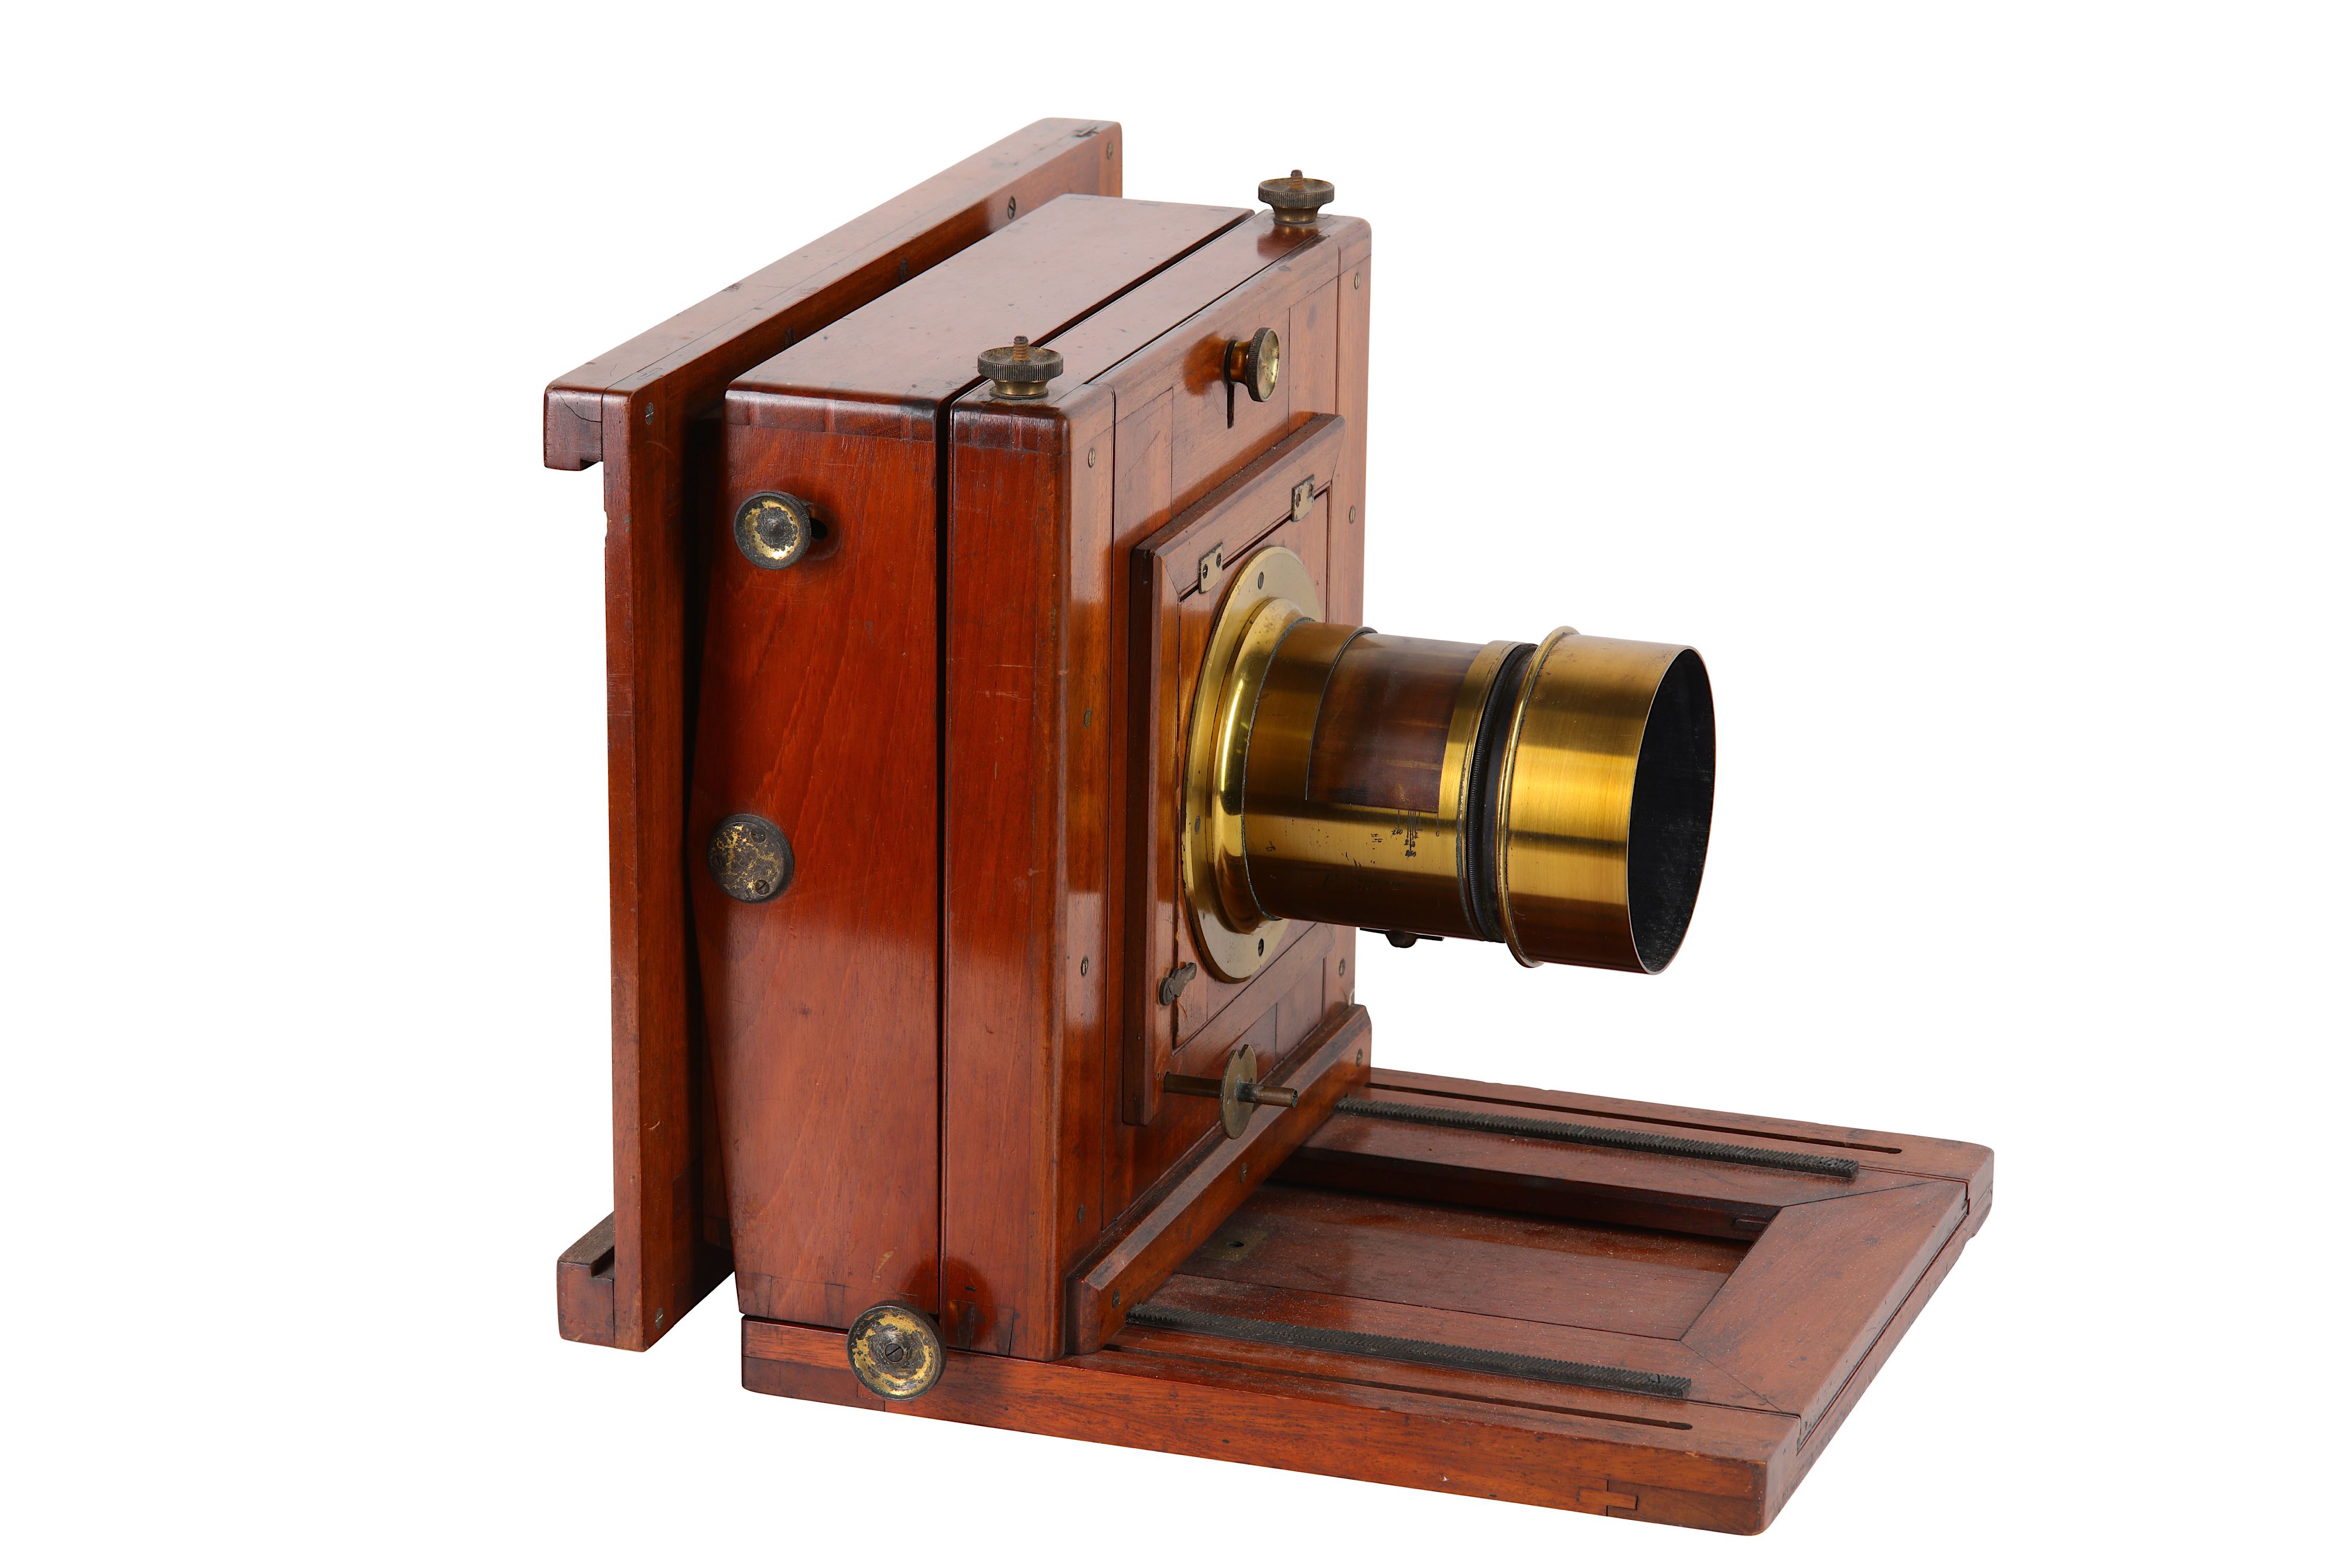 A Whole Plate Mahogany Studio Camera with Anachromatic Brass Lens - Image 3 of 6